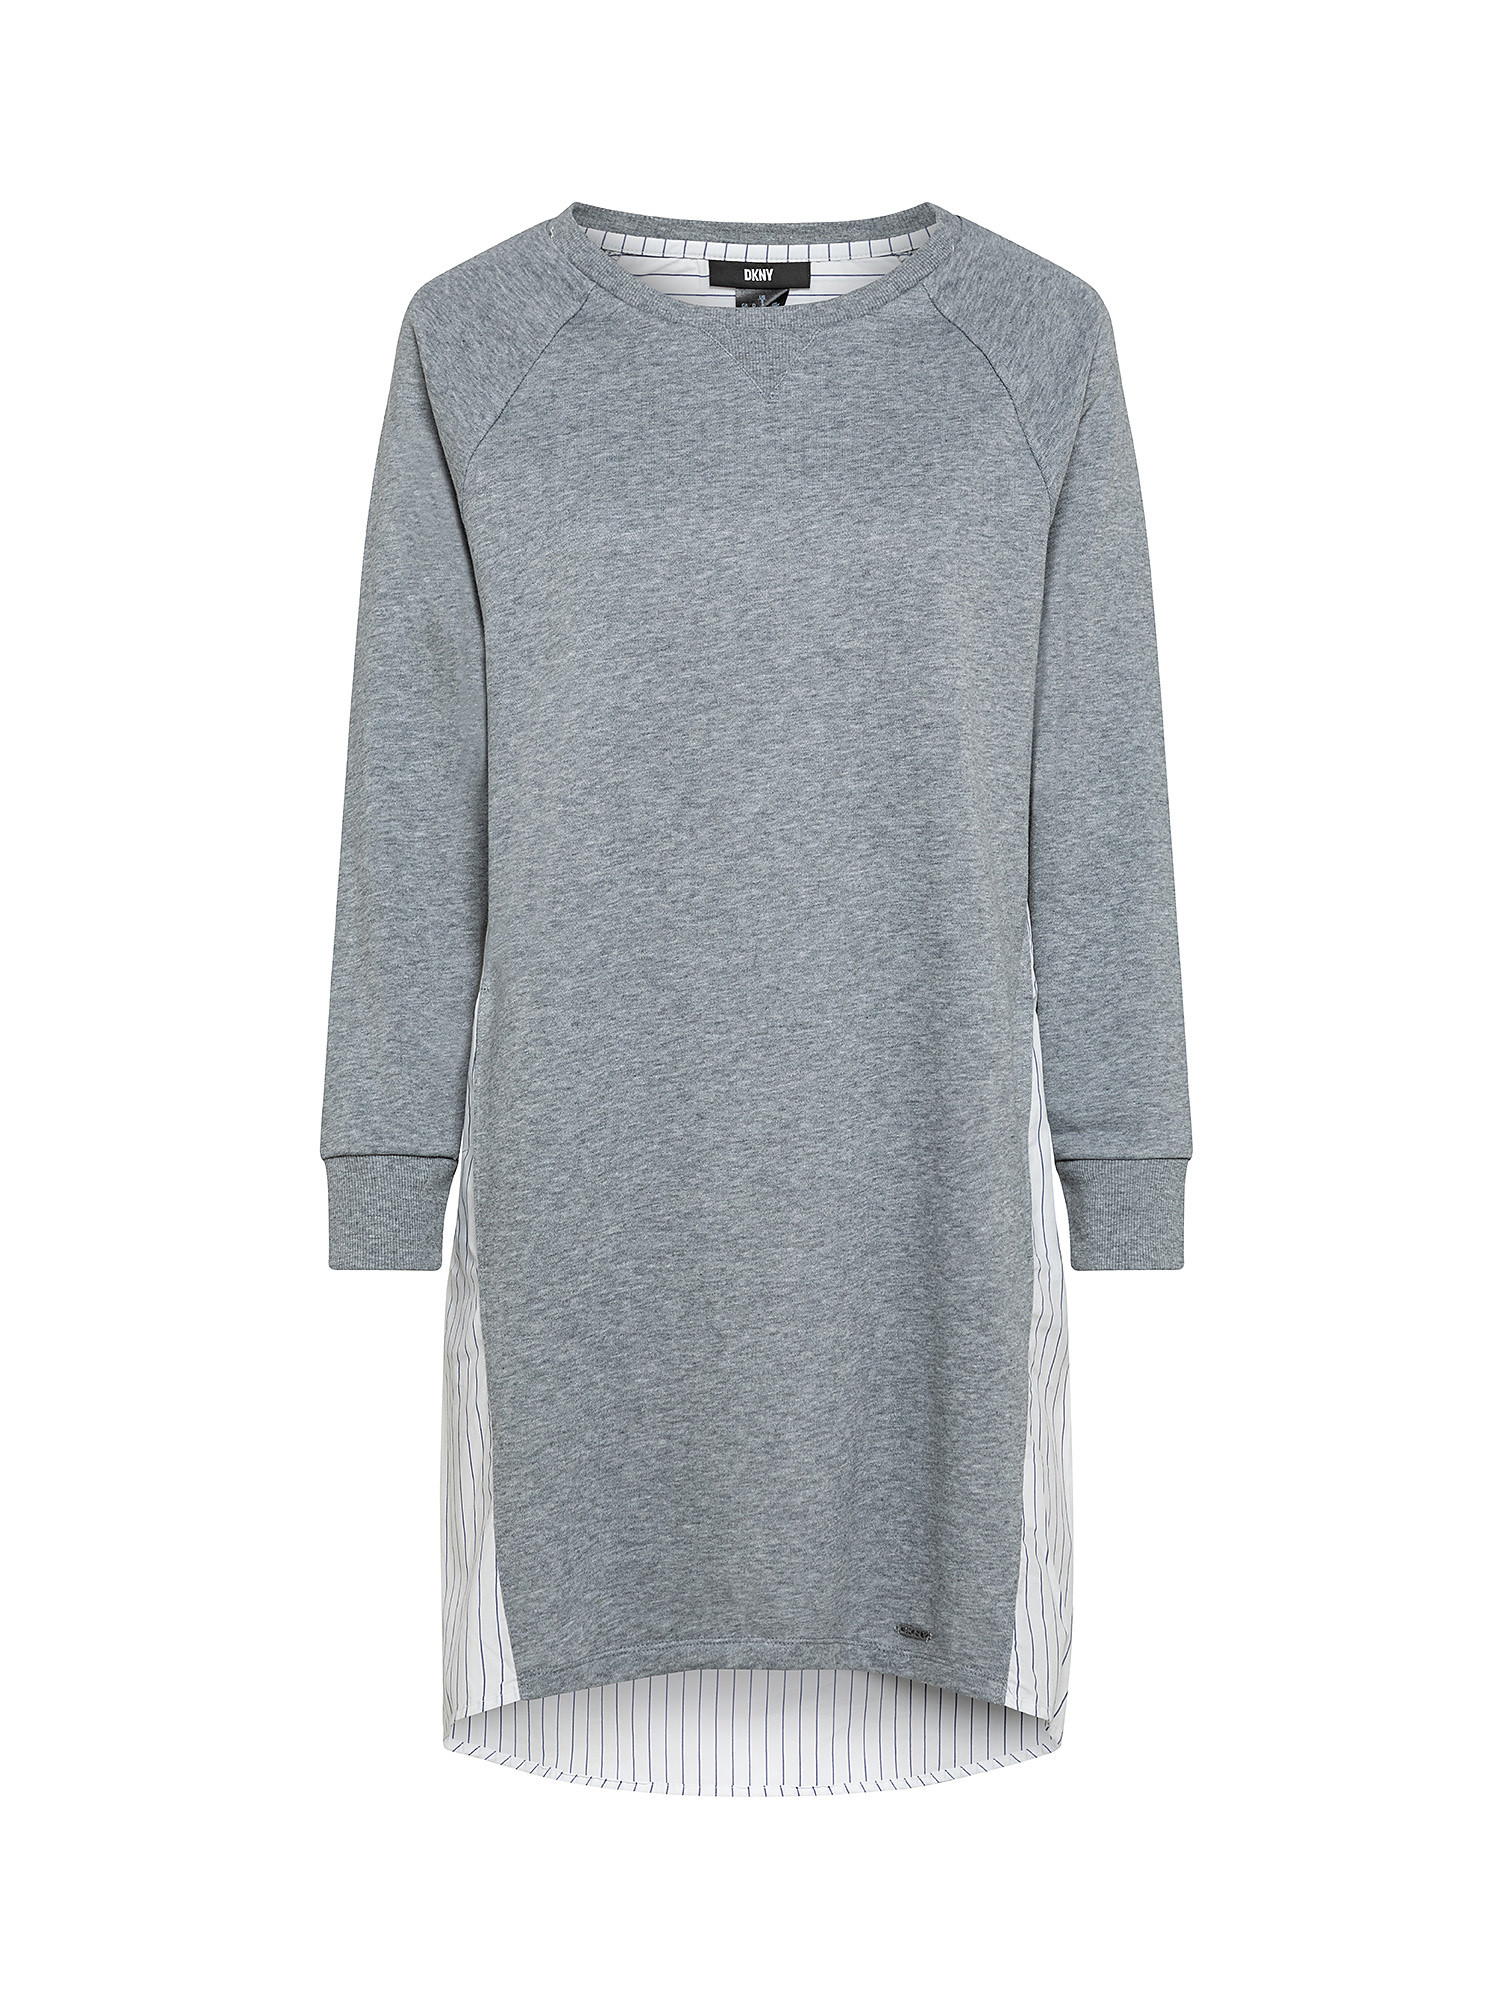 Knitted dress, Grey, large image number 0